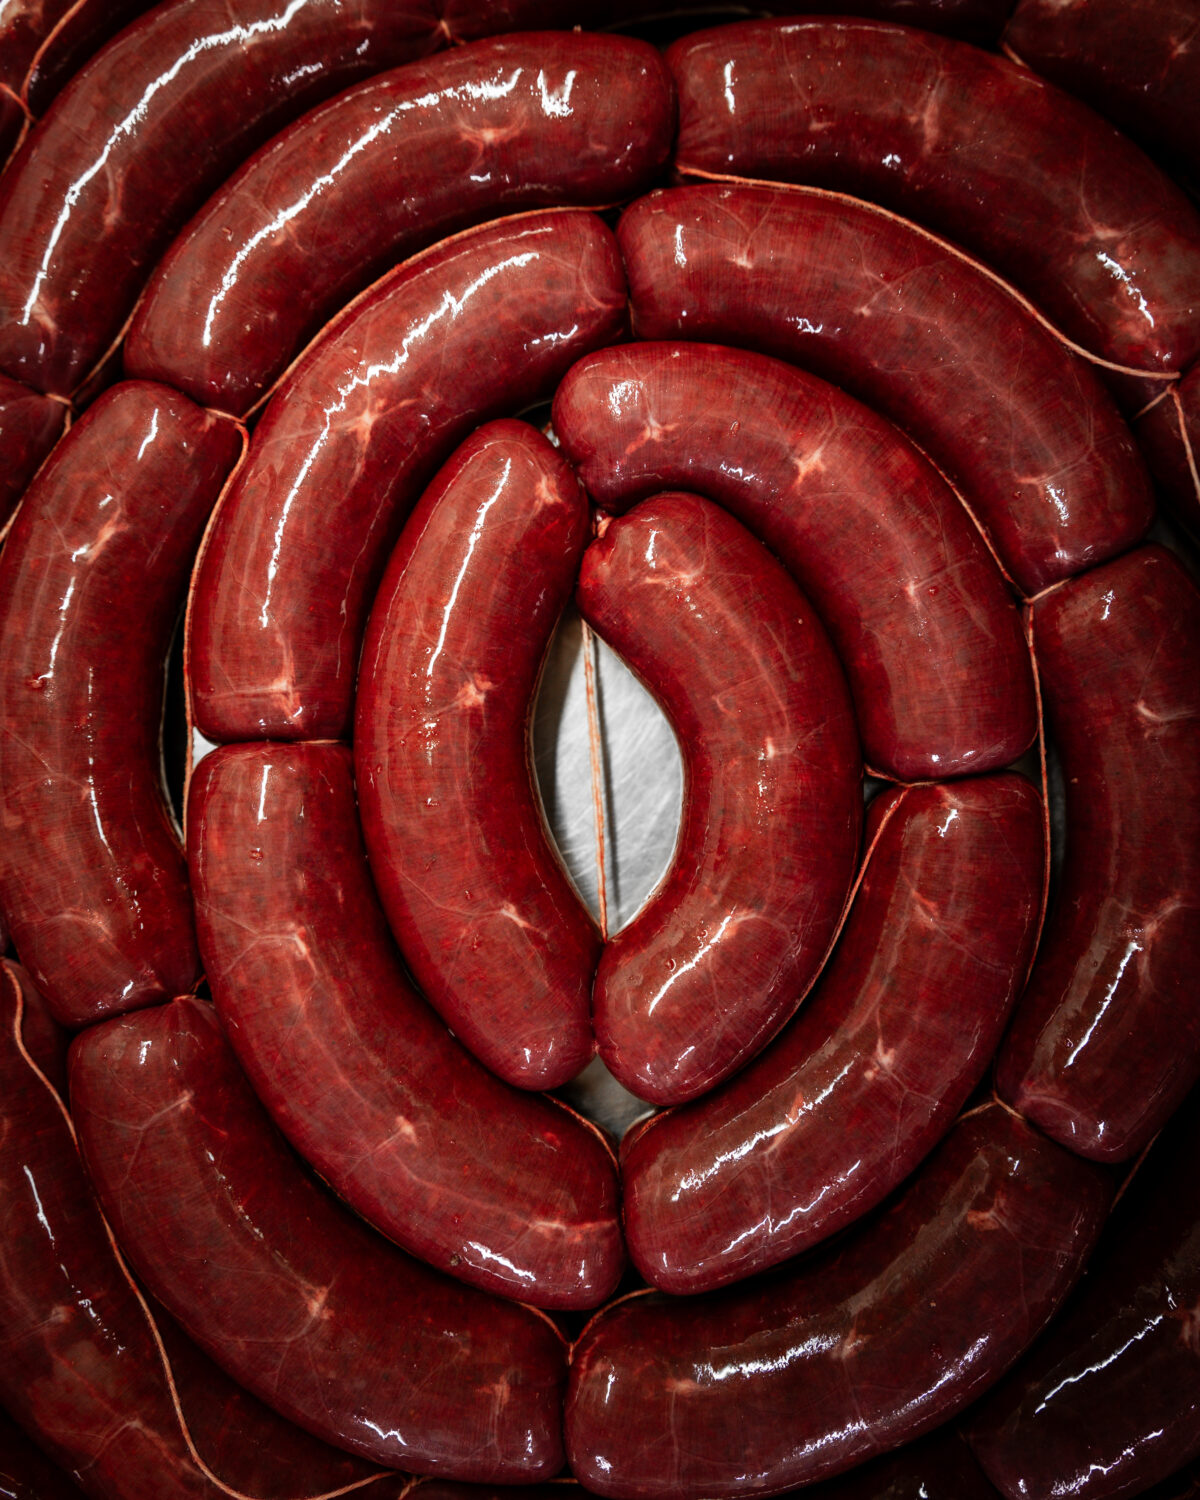 blood sausage, nose to tail, blunze, homemade